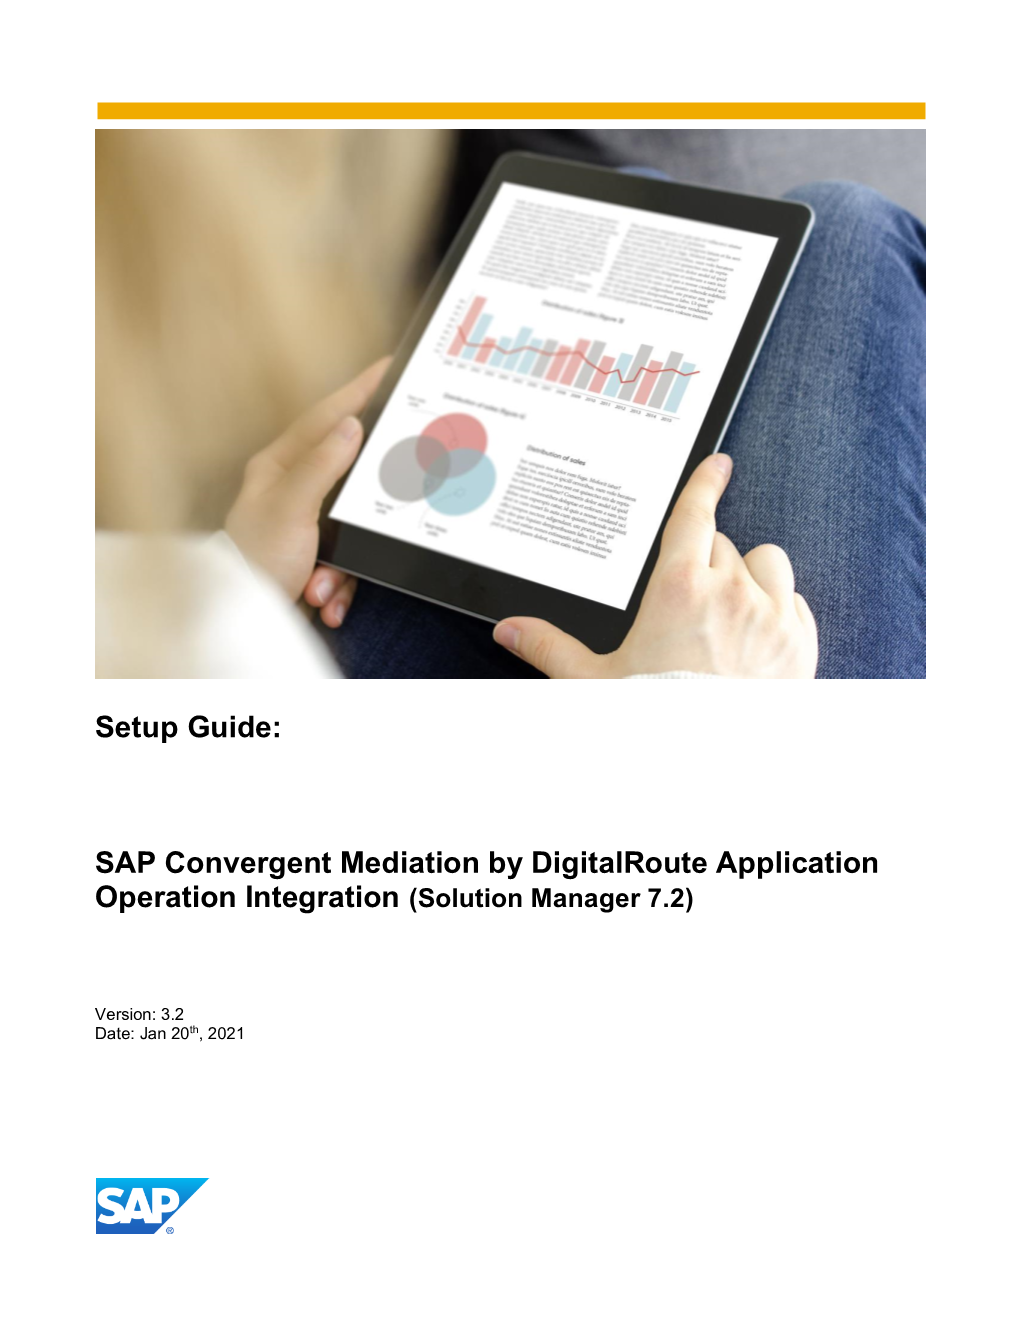 SAP Convergent Mediation by Digitalroute Application Operation Integration (Solution Manager 7.2)